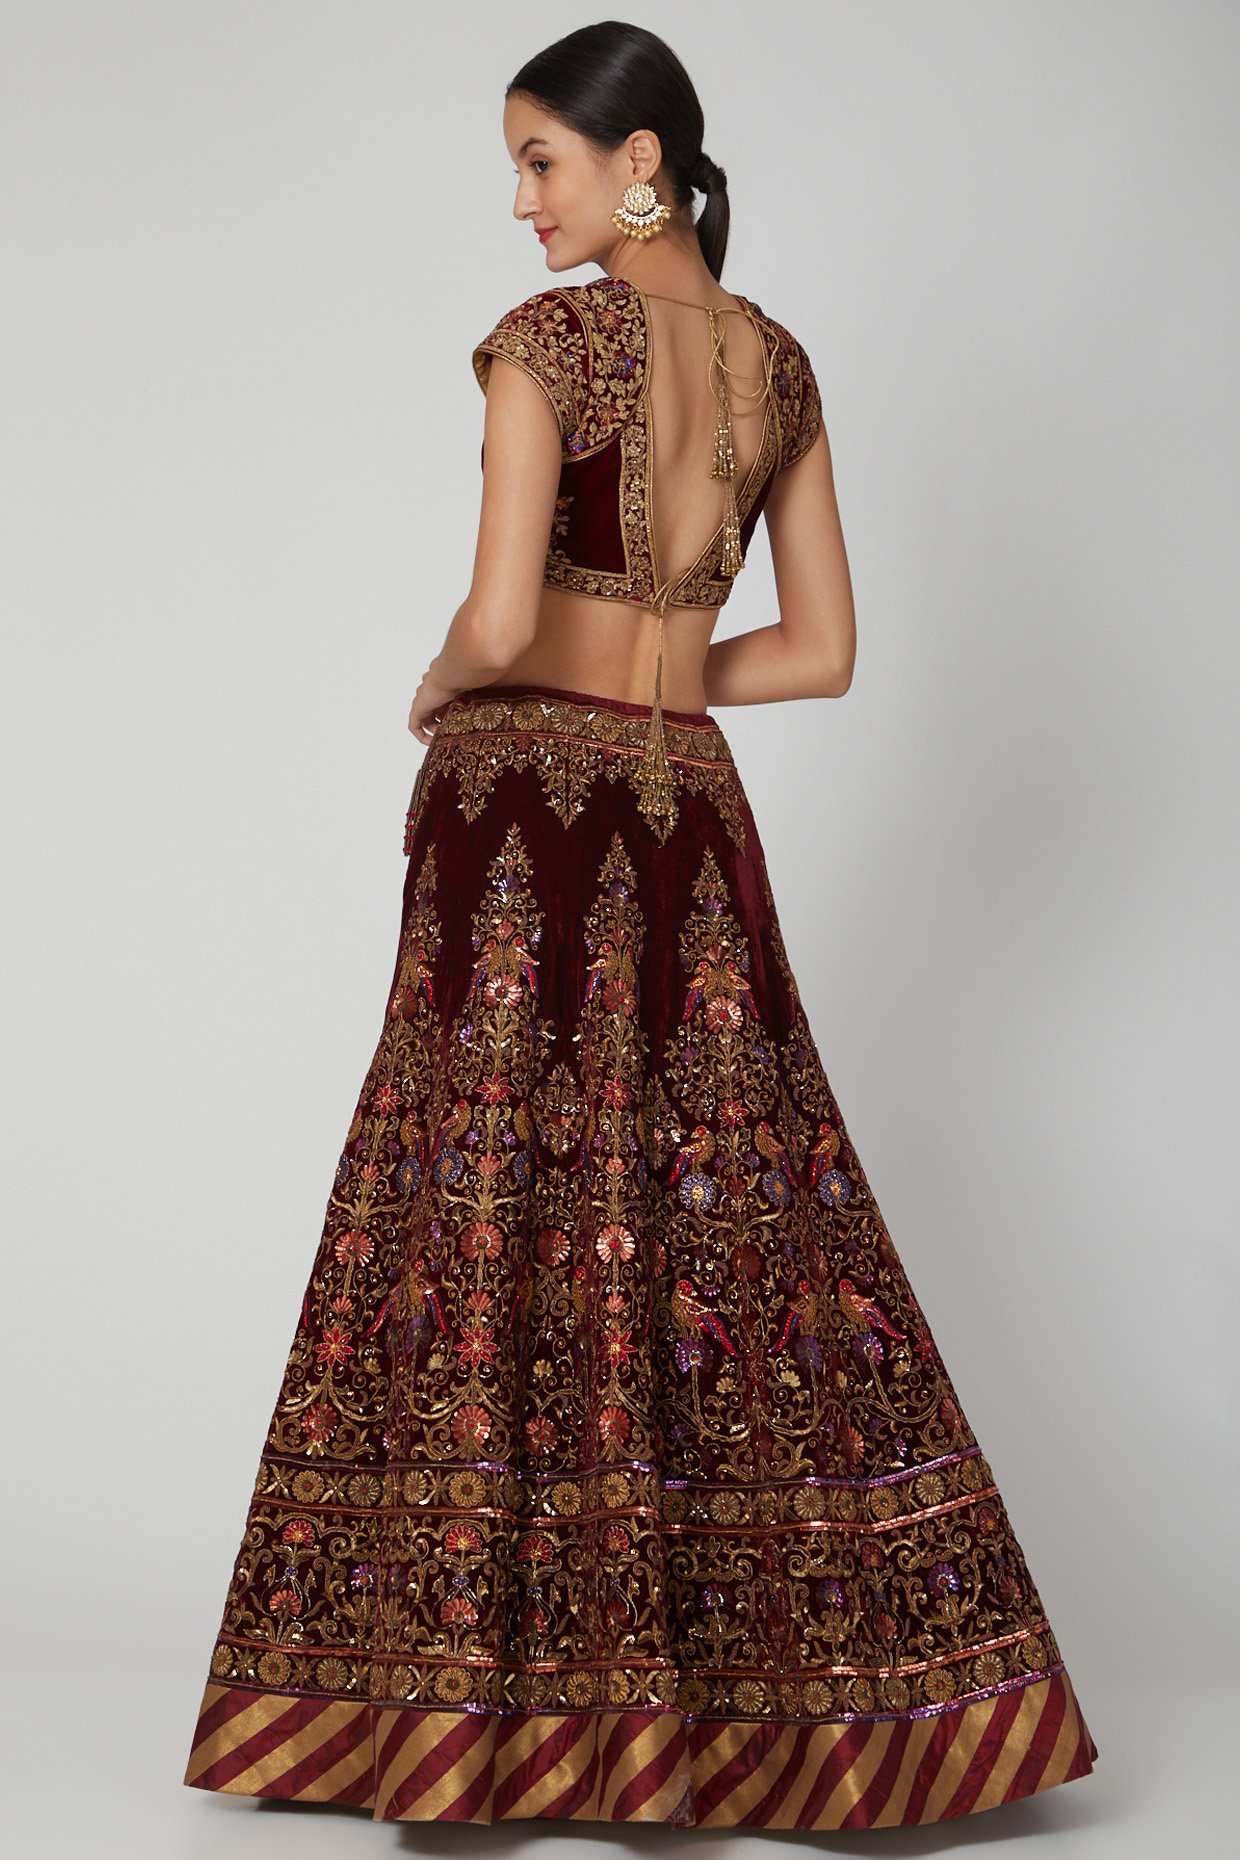 Shop Bollywood Inspired Maroon color Mulberry silk lehenga from India and  get Free delivery | Indian bridal wear, Indian wedding dress, Bridal lehenga